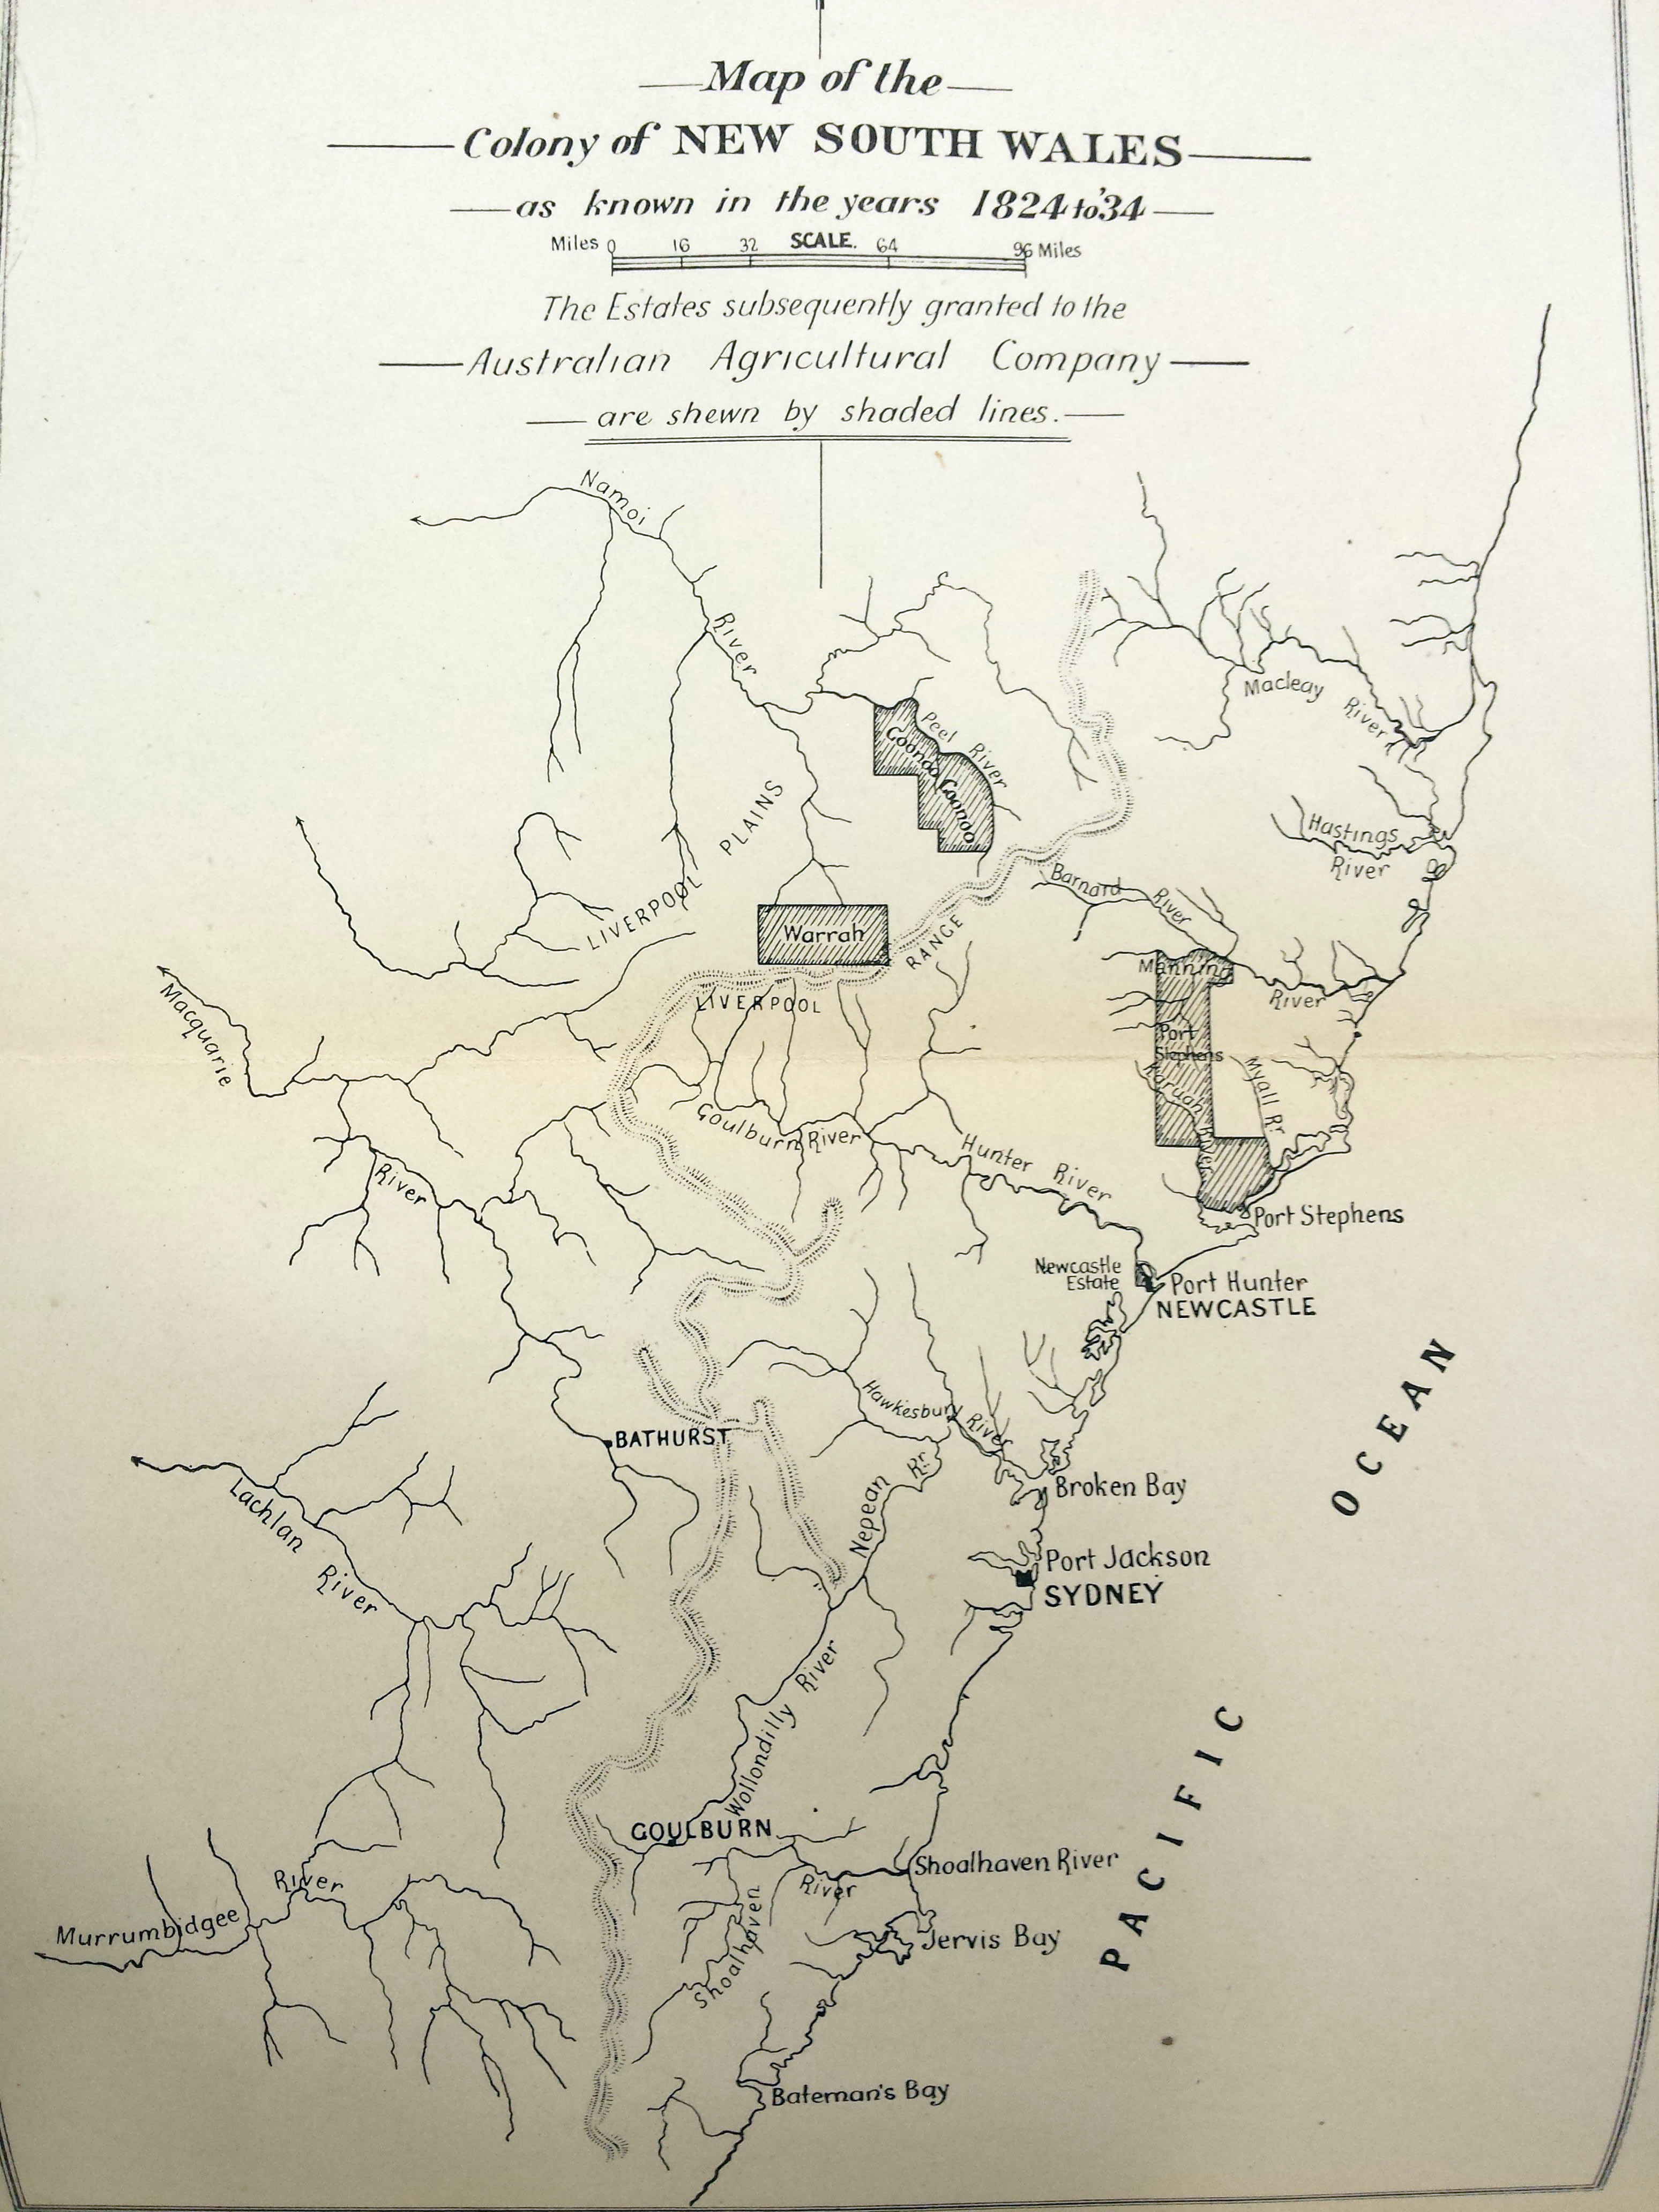 Map of Newcaslte & Port Stephens area. nd